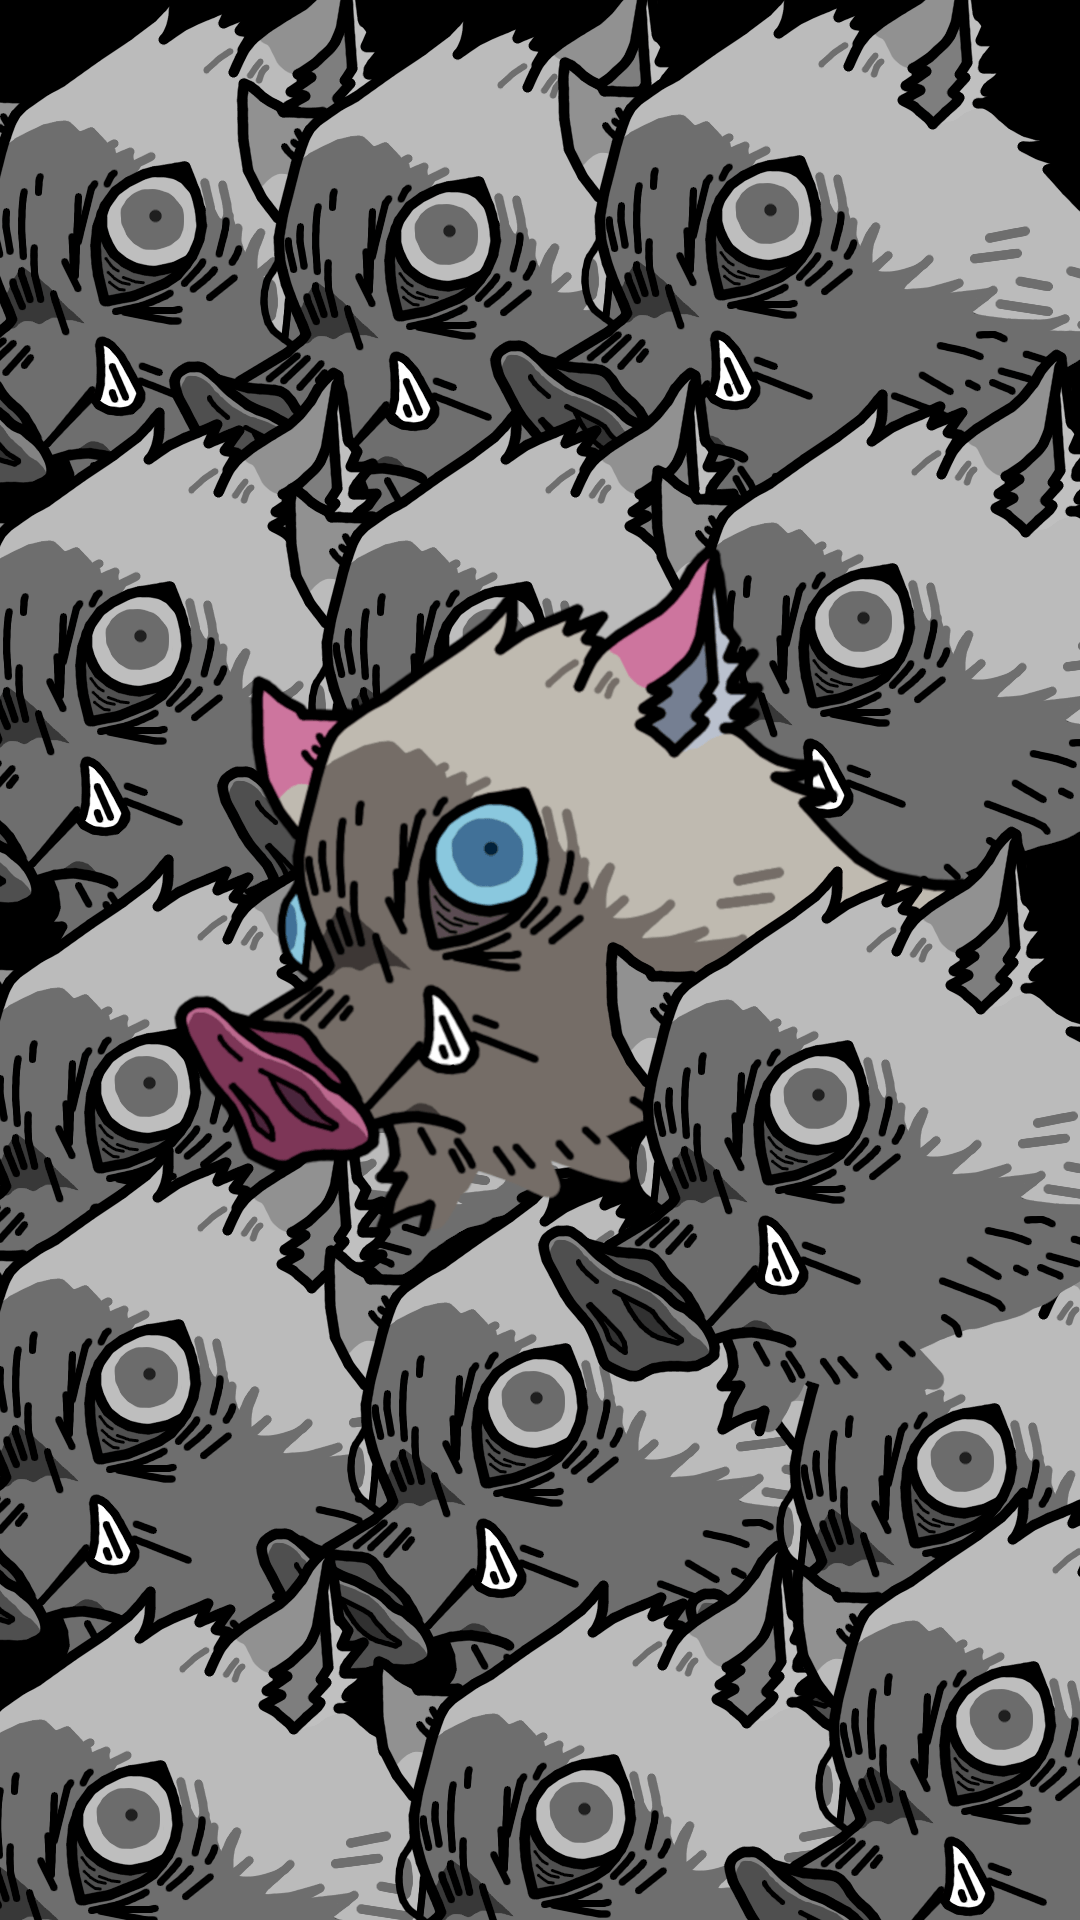 Made another phone wallpaper. This time of boar boi Inosuke